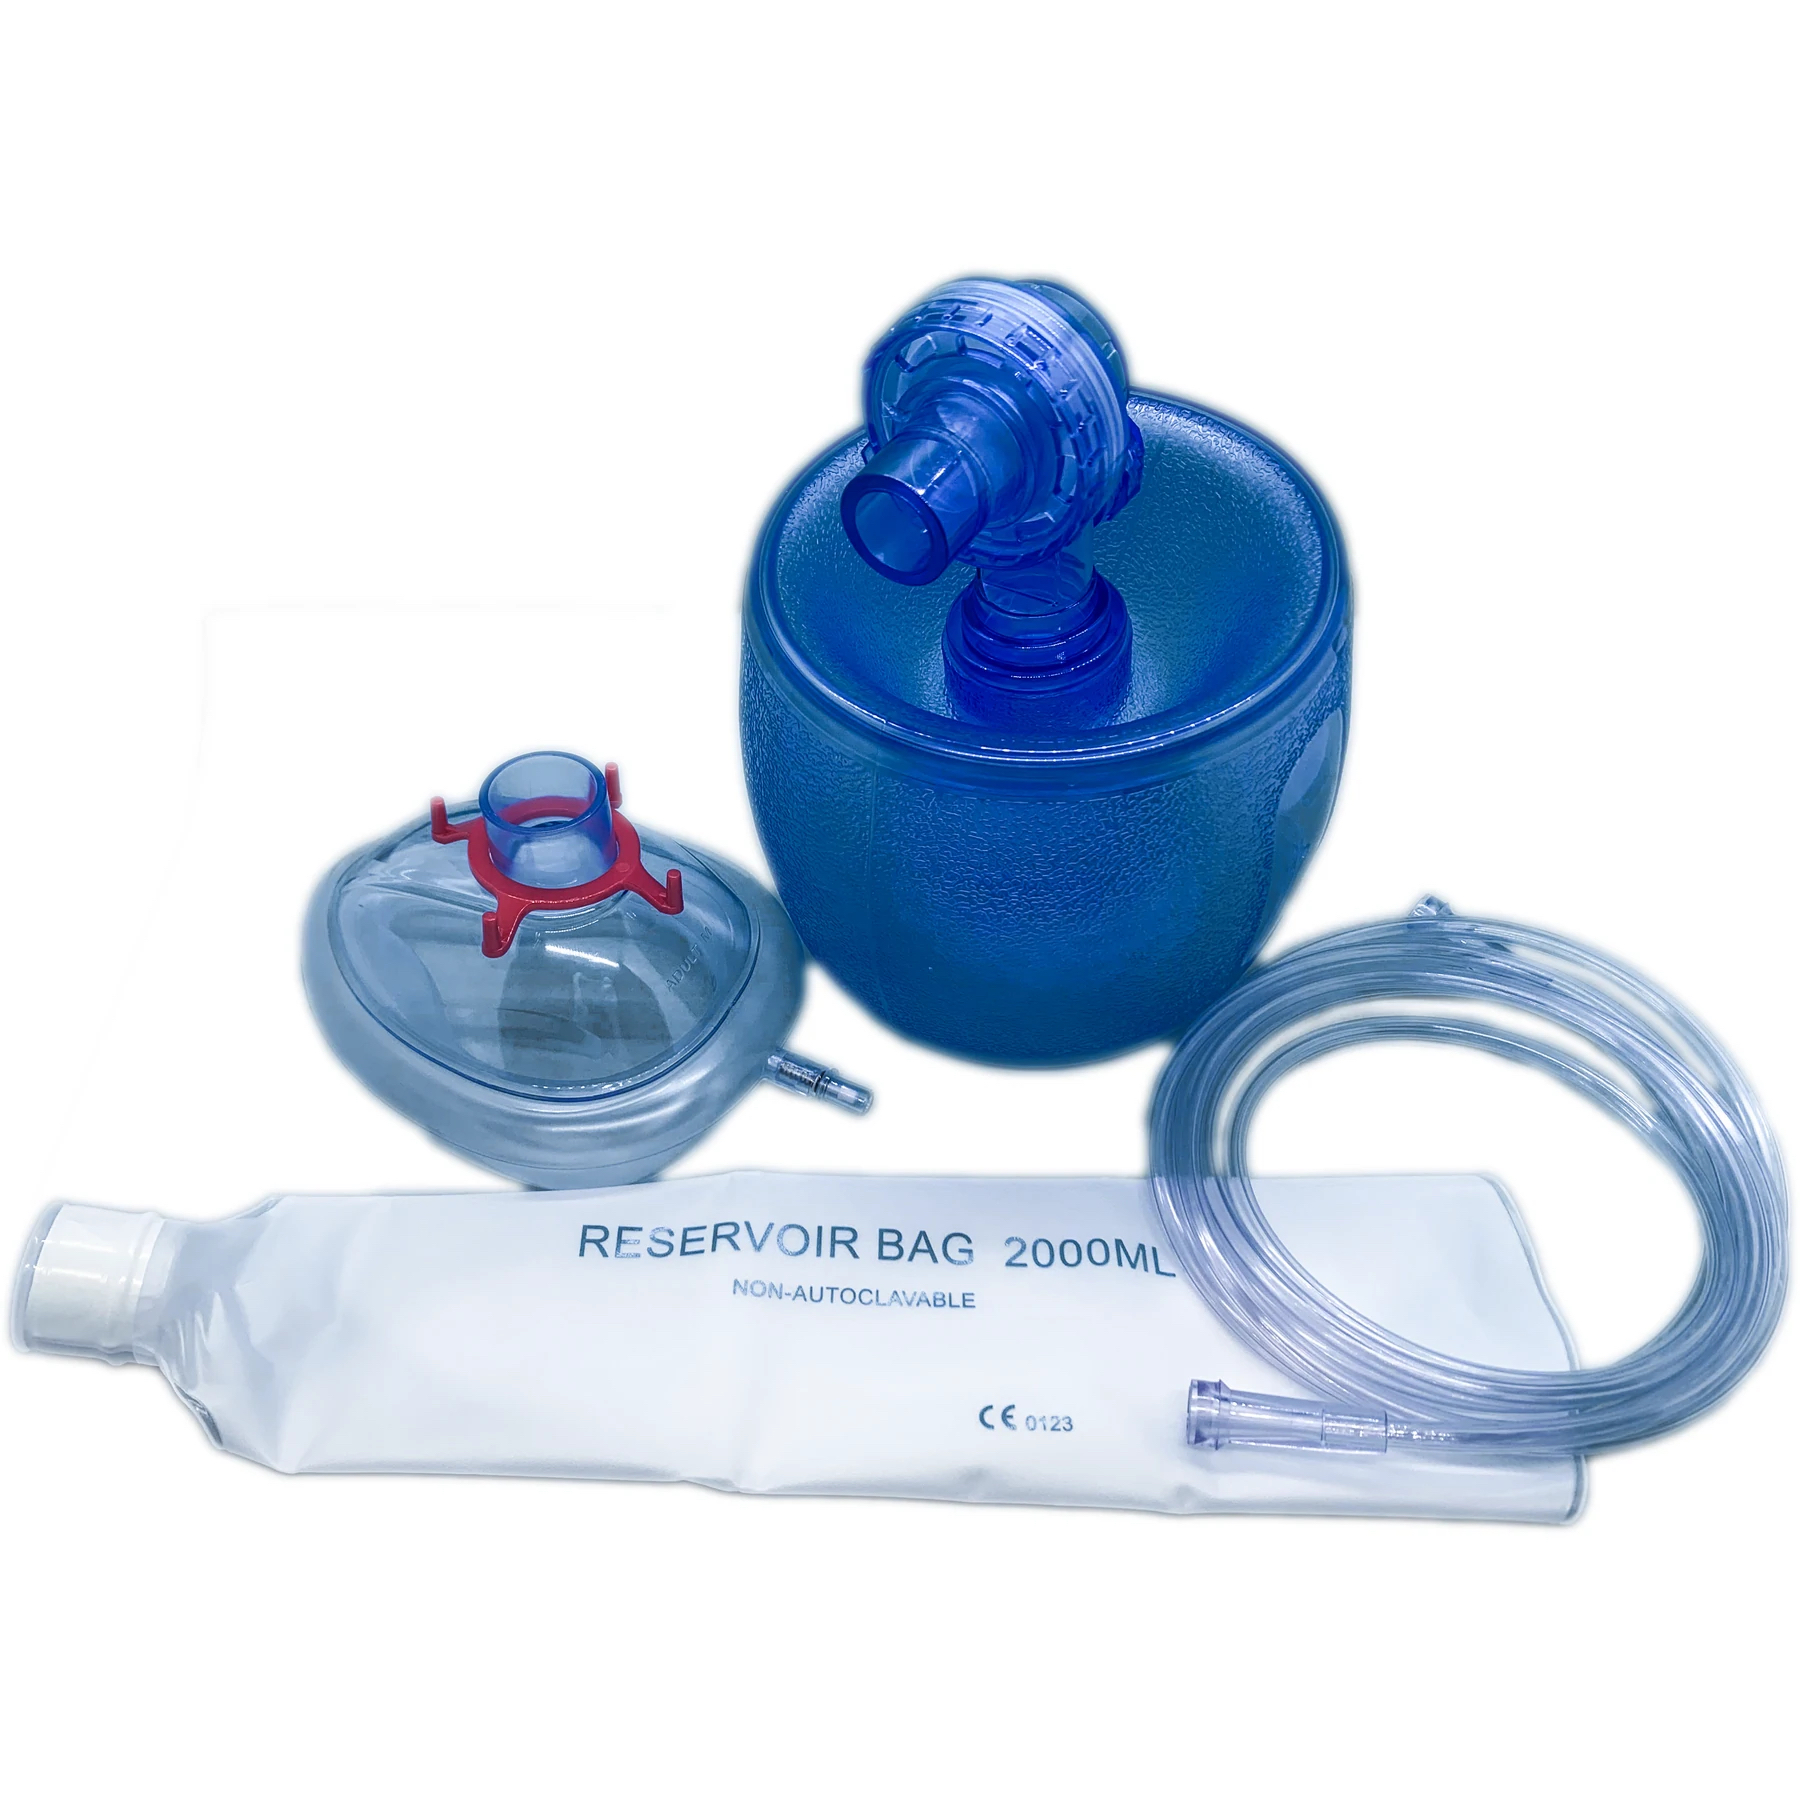 Emergency Silicone Resuscitator first aid kit